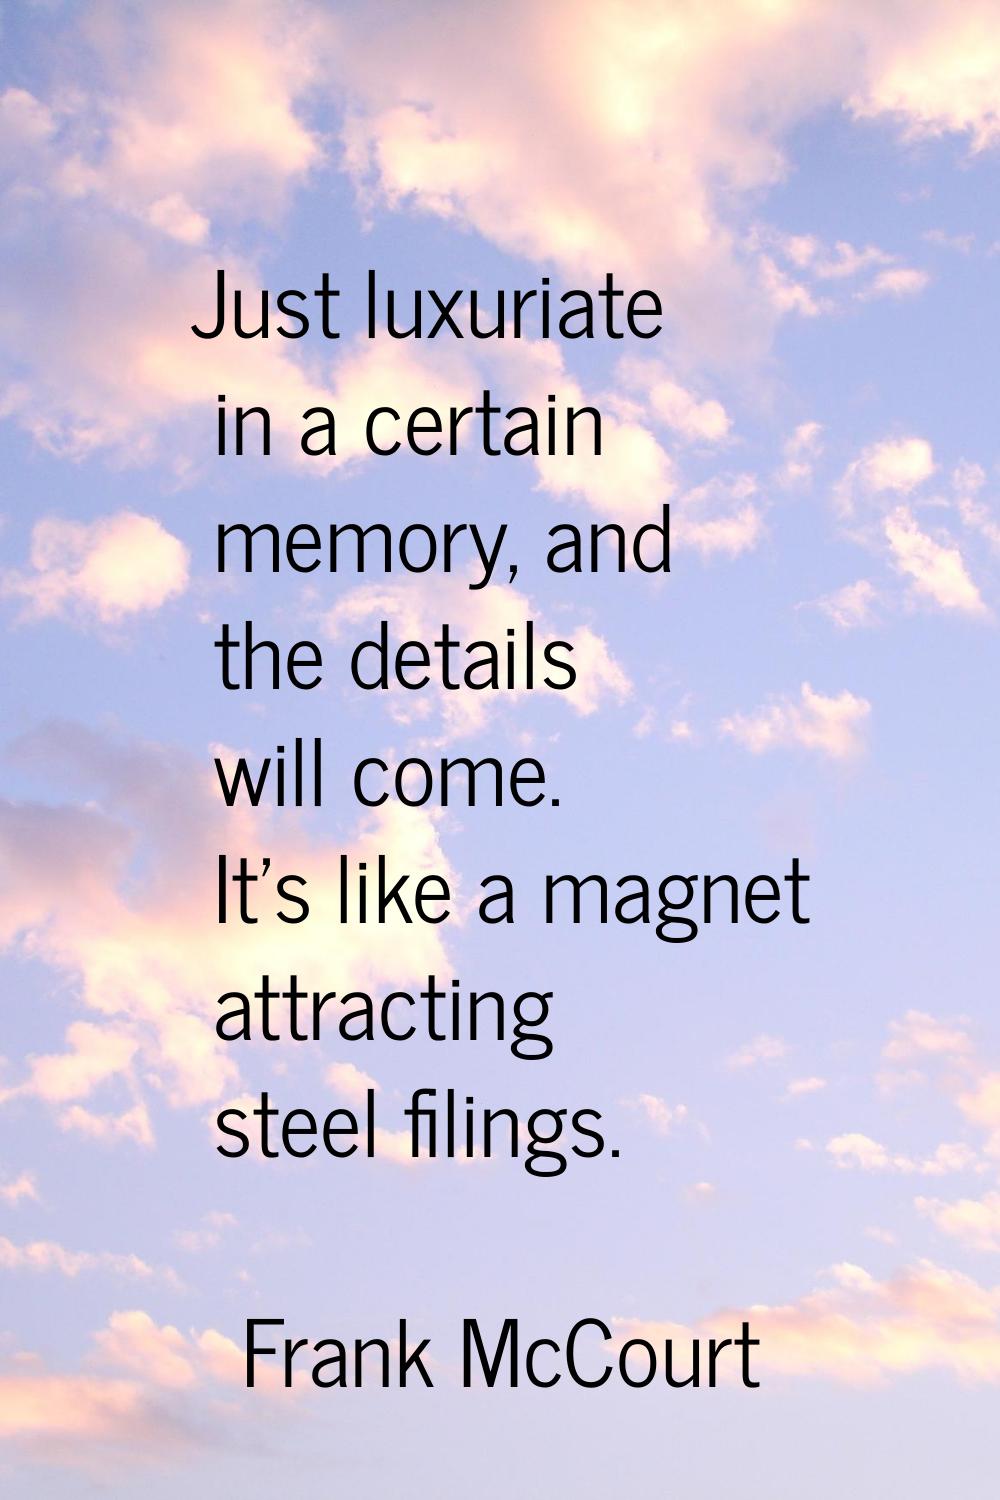 Just luxuriate in a certain memory, and the details will come. It's like a magnet attracting steel 